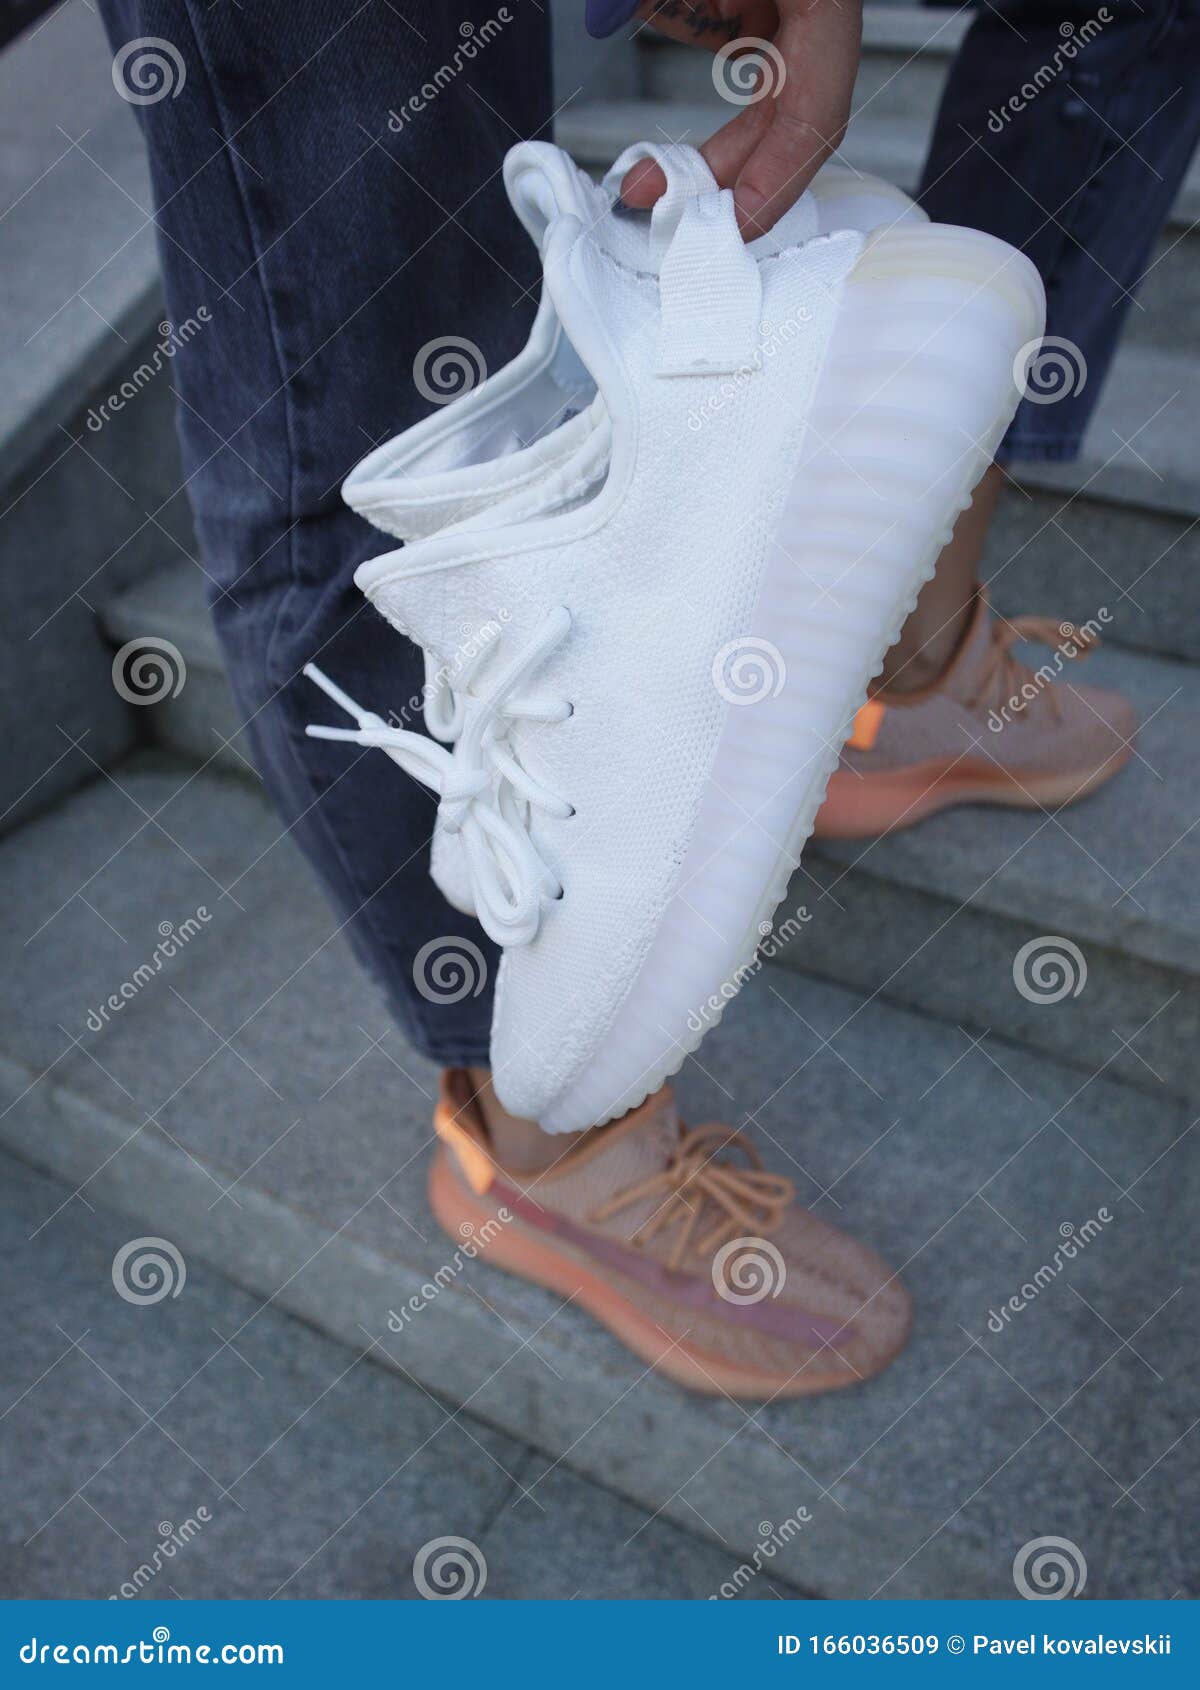 yeezy boost 350 with jeans